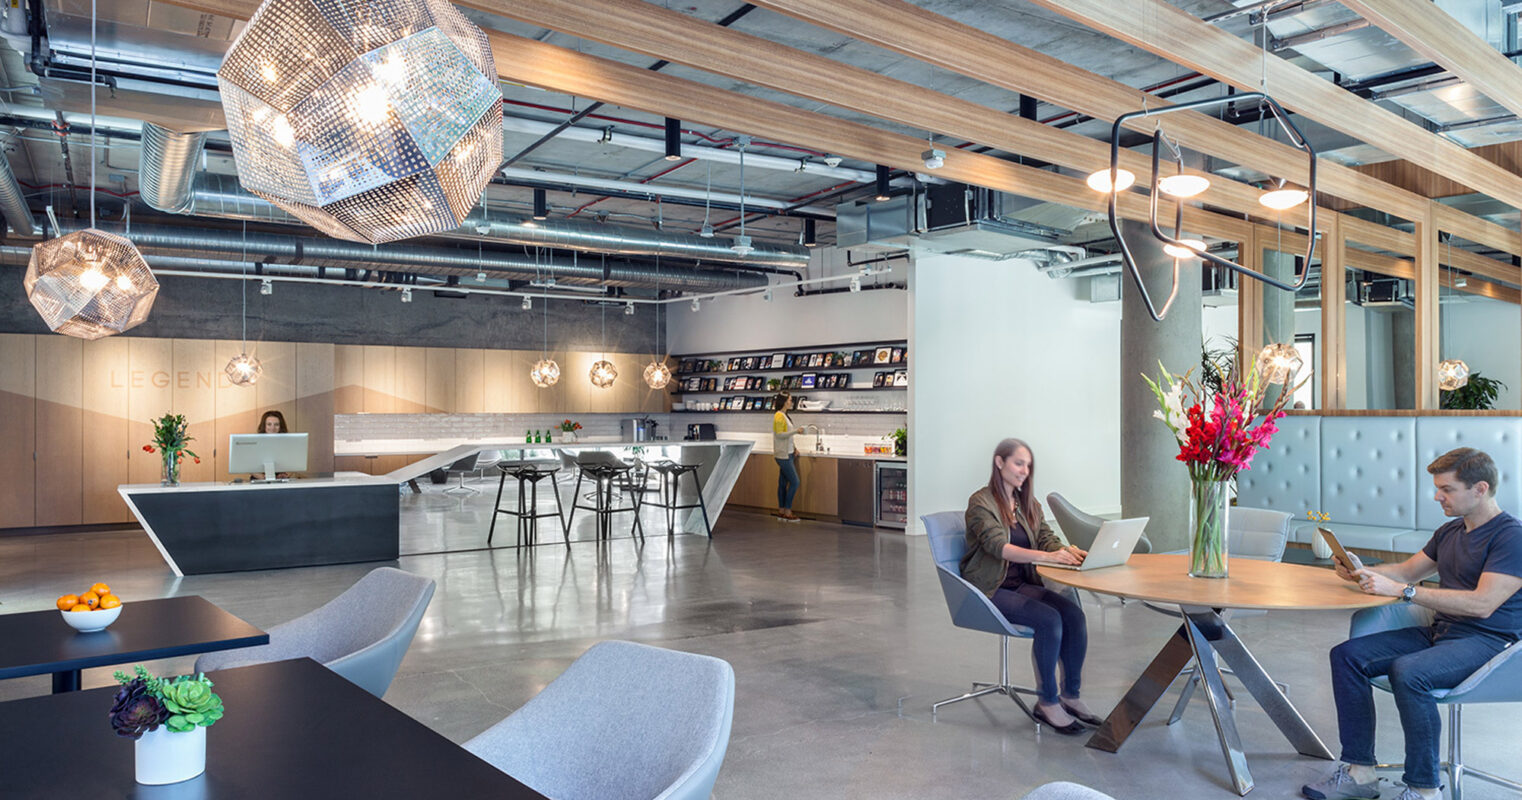 Modern office space showcasing exposed ceiling beams and ductwork, with a large geometric pendant light. Features an open floor plan with a kitchenette, communal dining area, and casual seating. A mix of natural and artificial lighting enhances the industrial yet inviting ambiance.